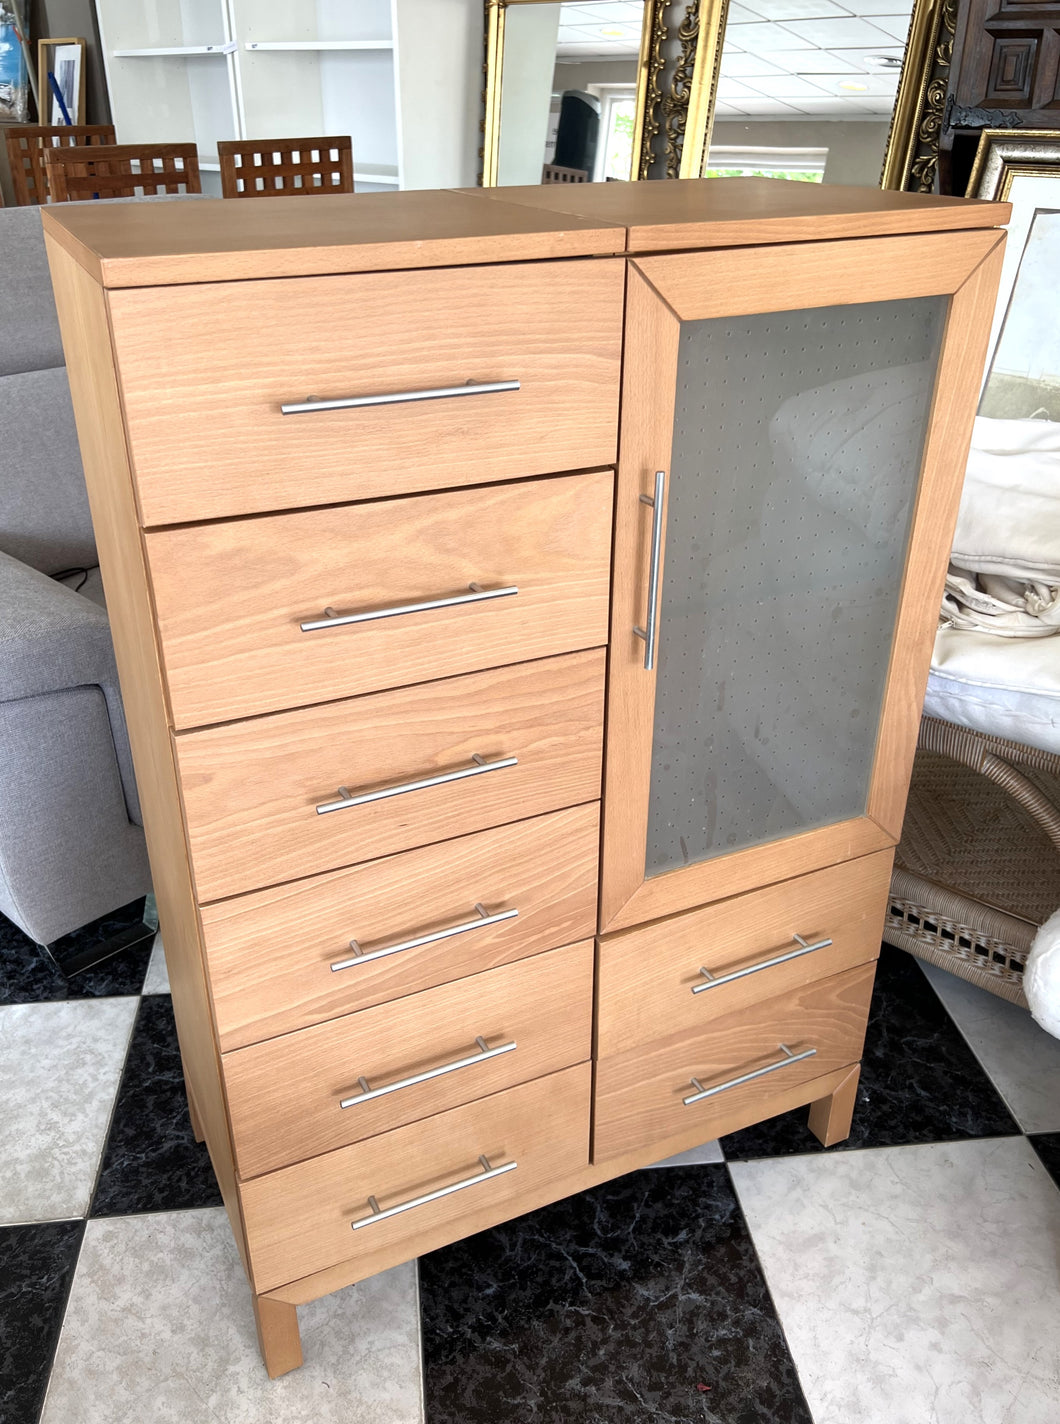 1125 - Solid unit with drawers (80cm x 40cm, 120cm high)